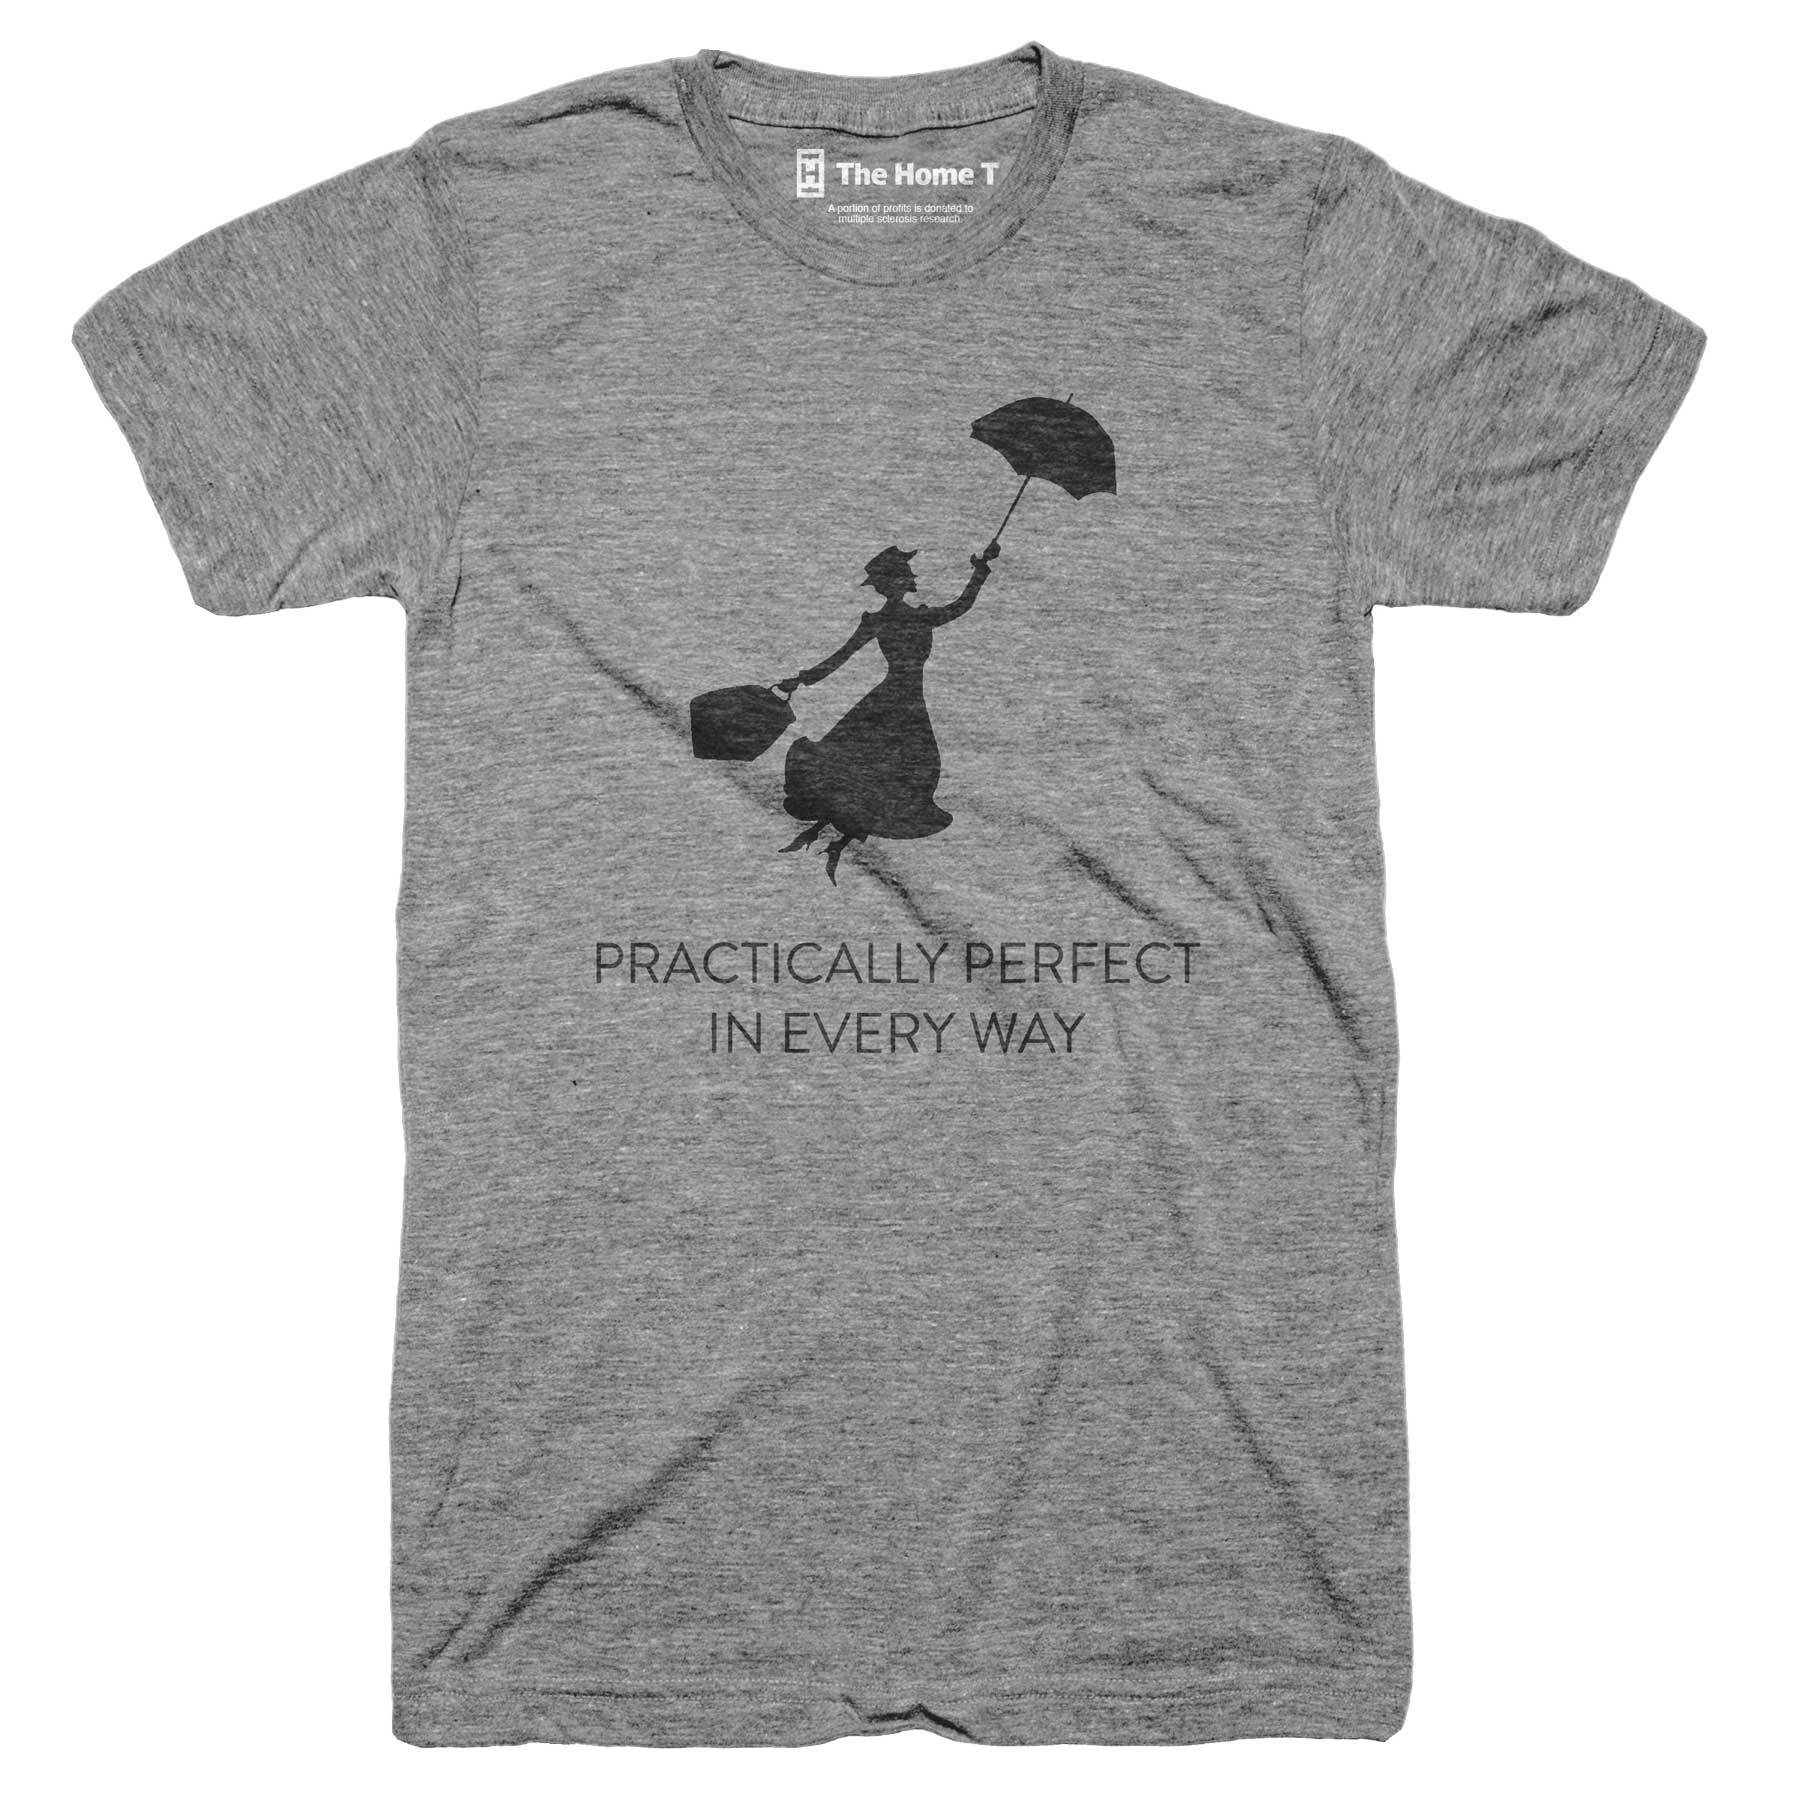 PRACTICALLY PERFECT in Every Way Shirt Mary Poppins Shirt 